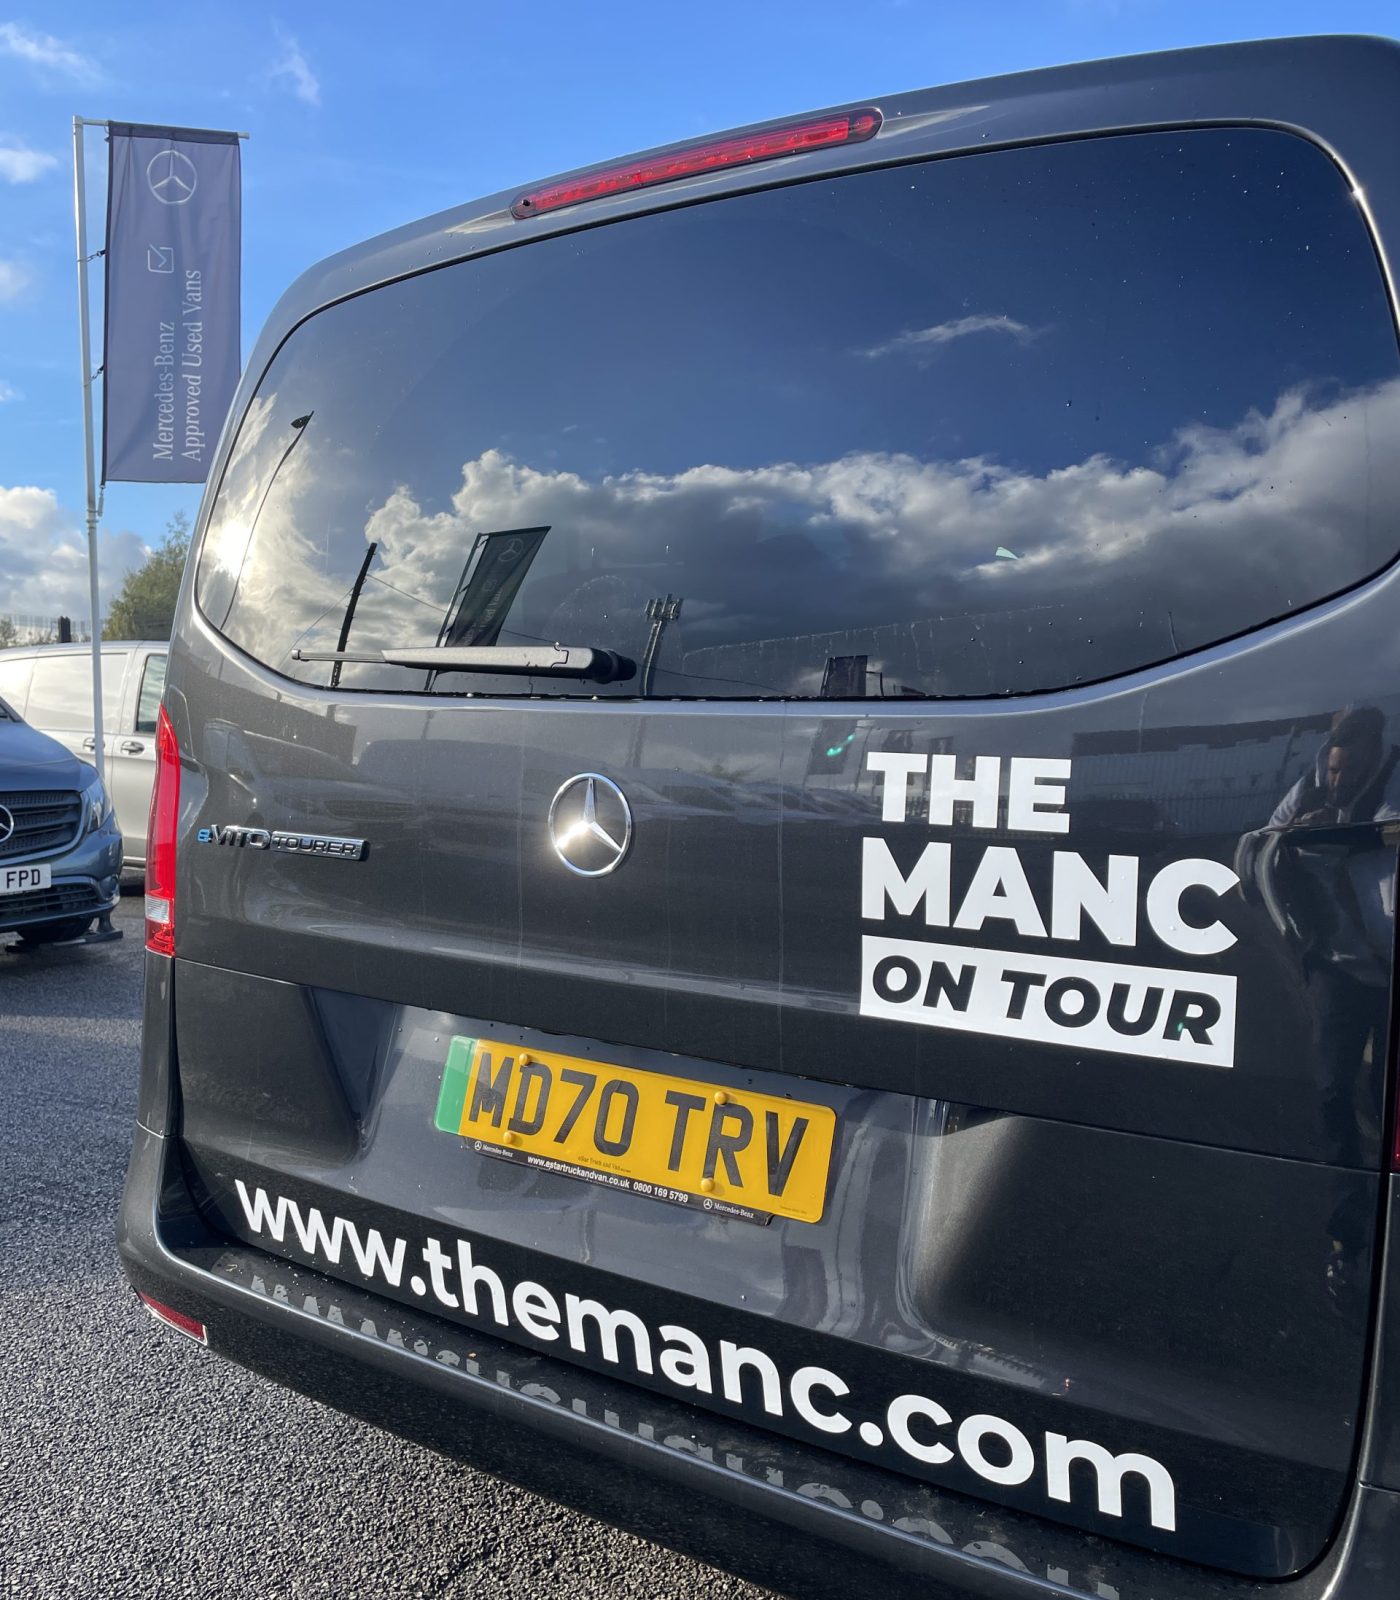 eStar Mercedes-Benz kits The Manc out with a branded fully-electric tourer van, The Manc